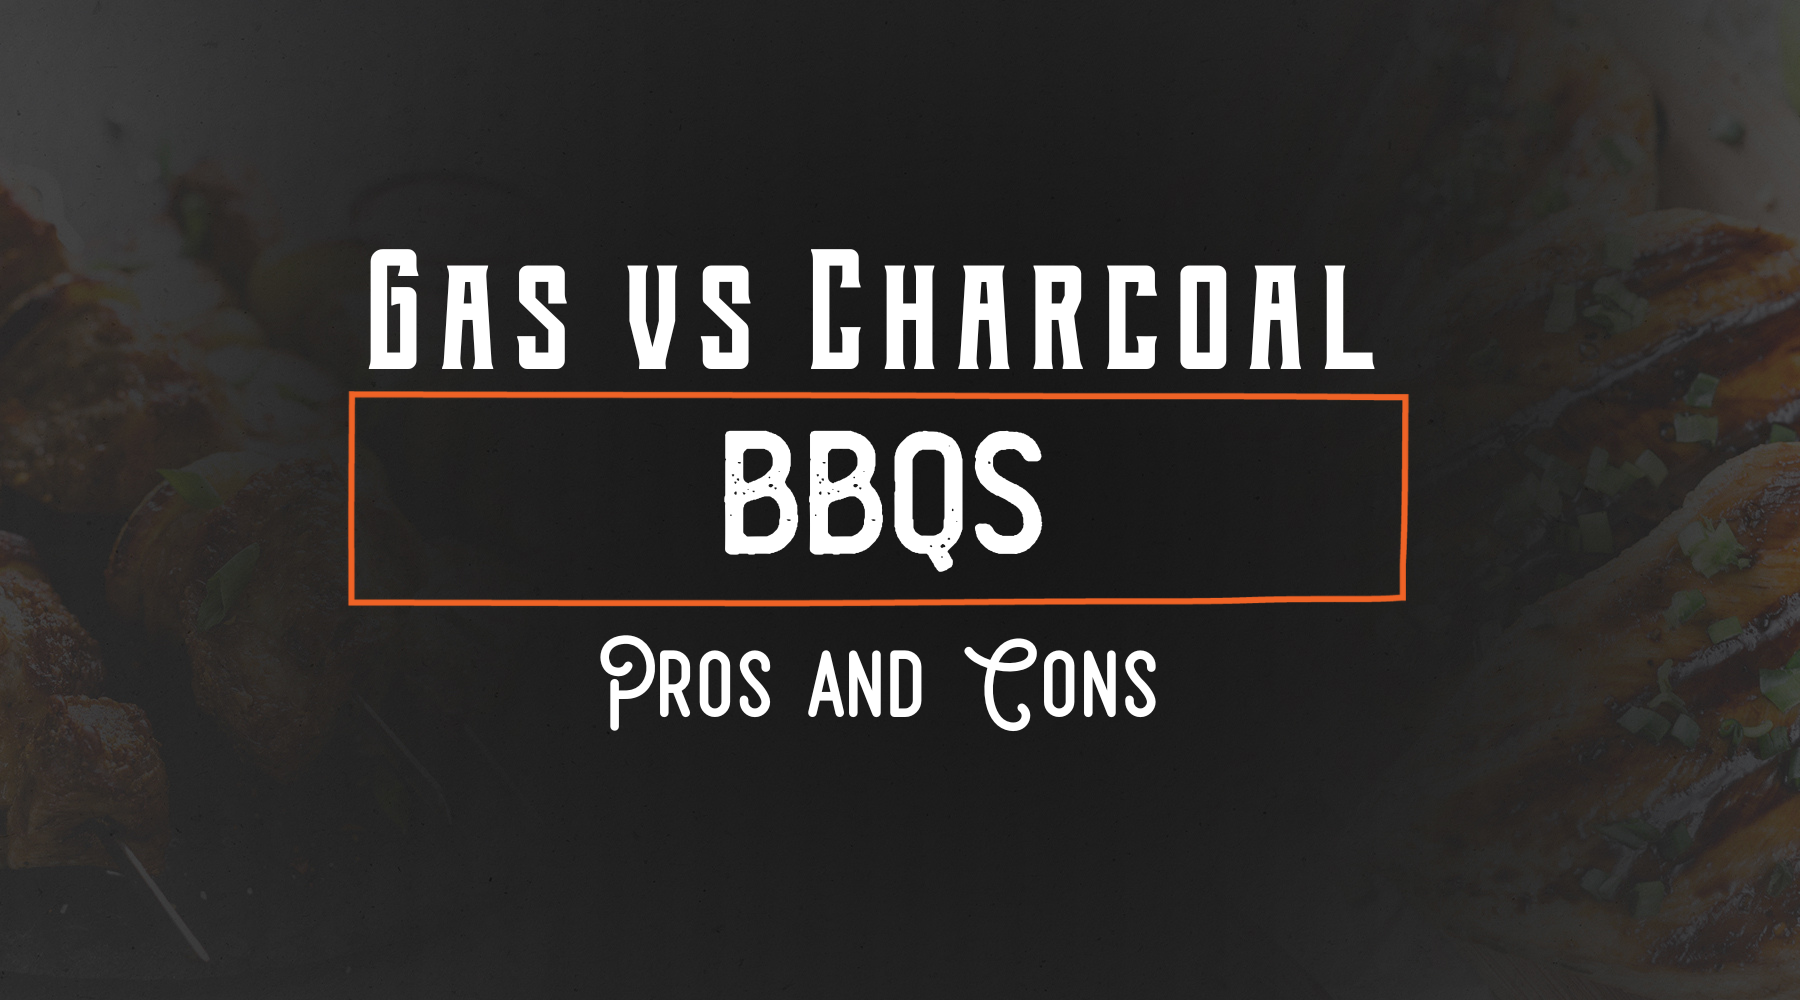 Charcoal vs Gas BBQ Cookery: Pros and Cons